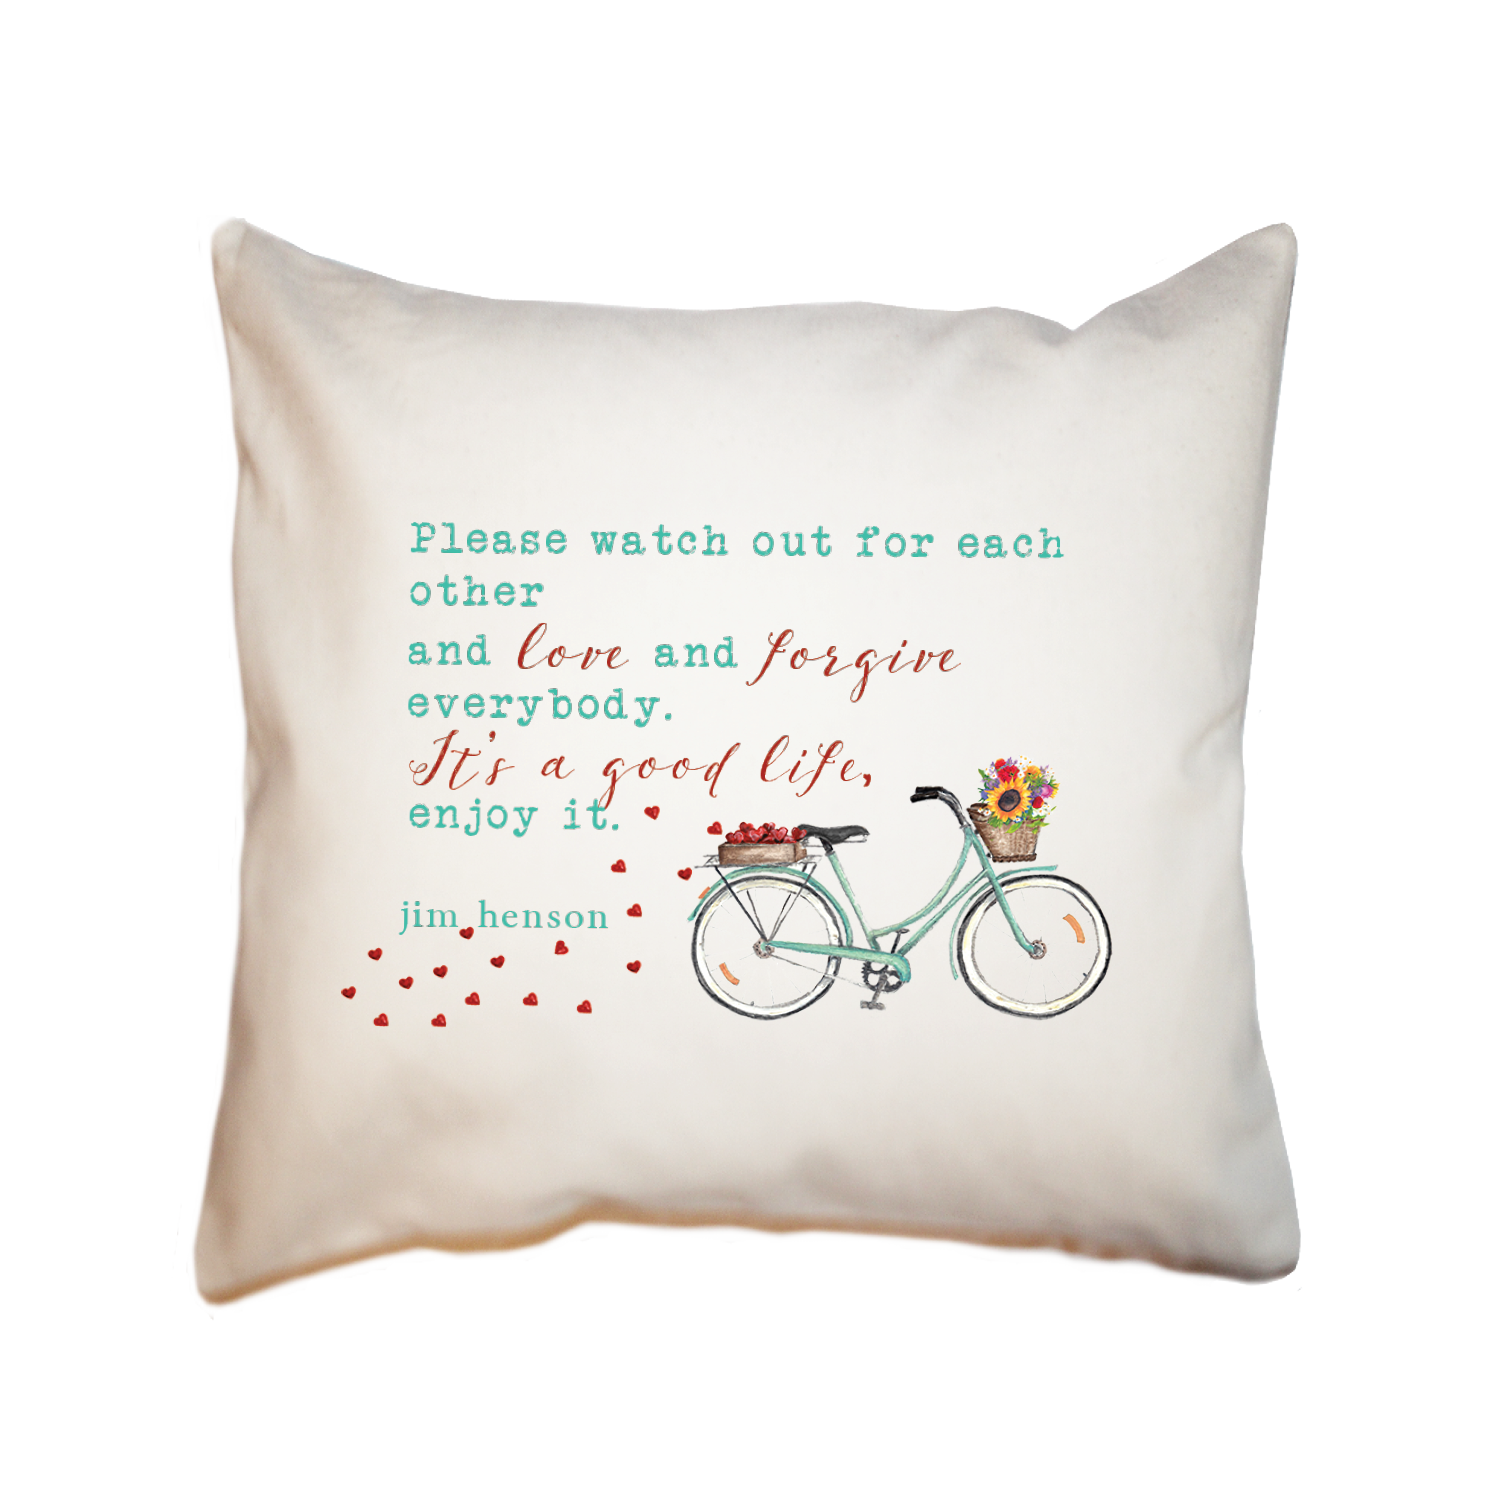 wildflower bike with jim henson quote square pillow